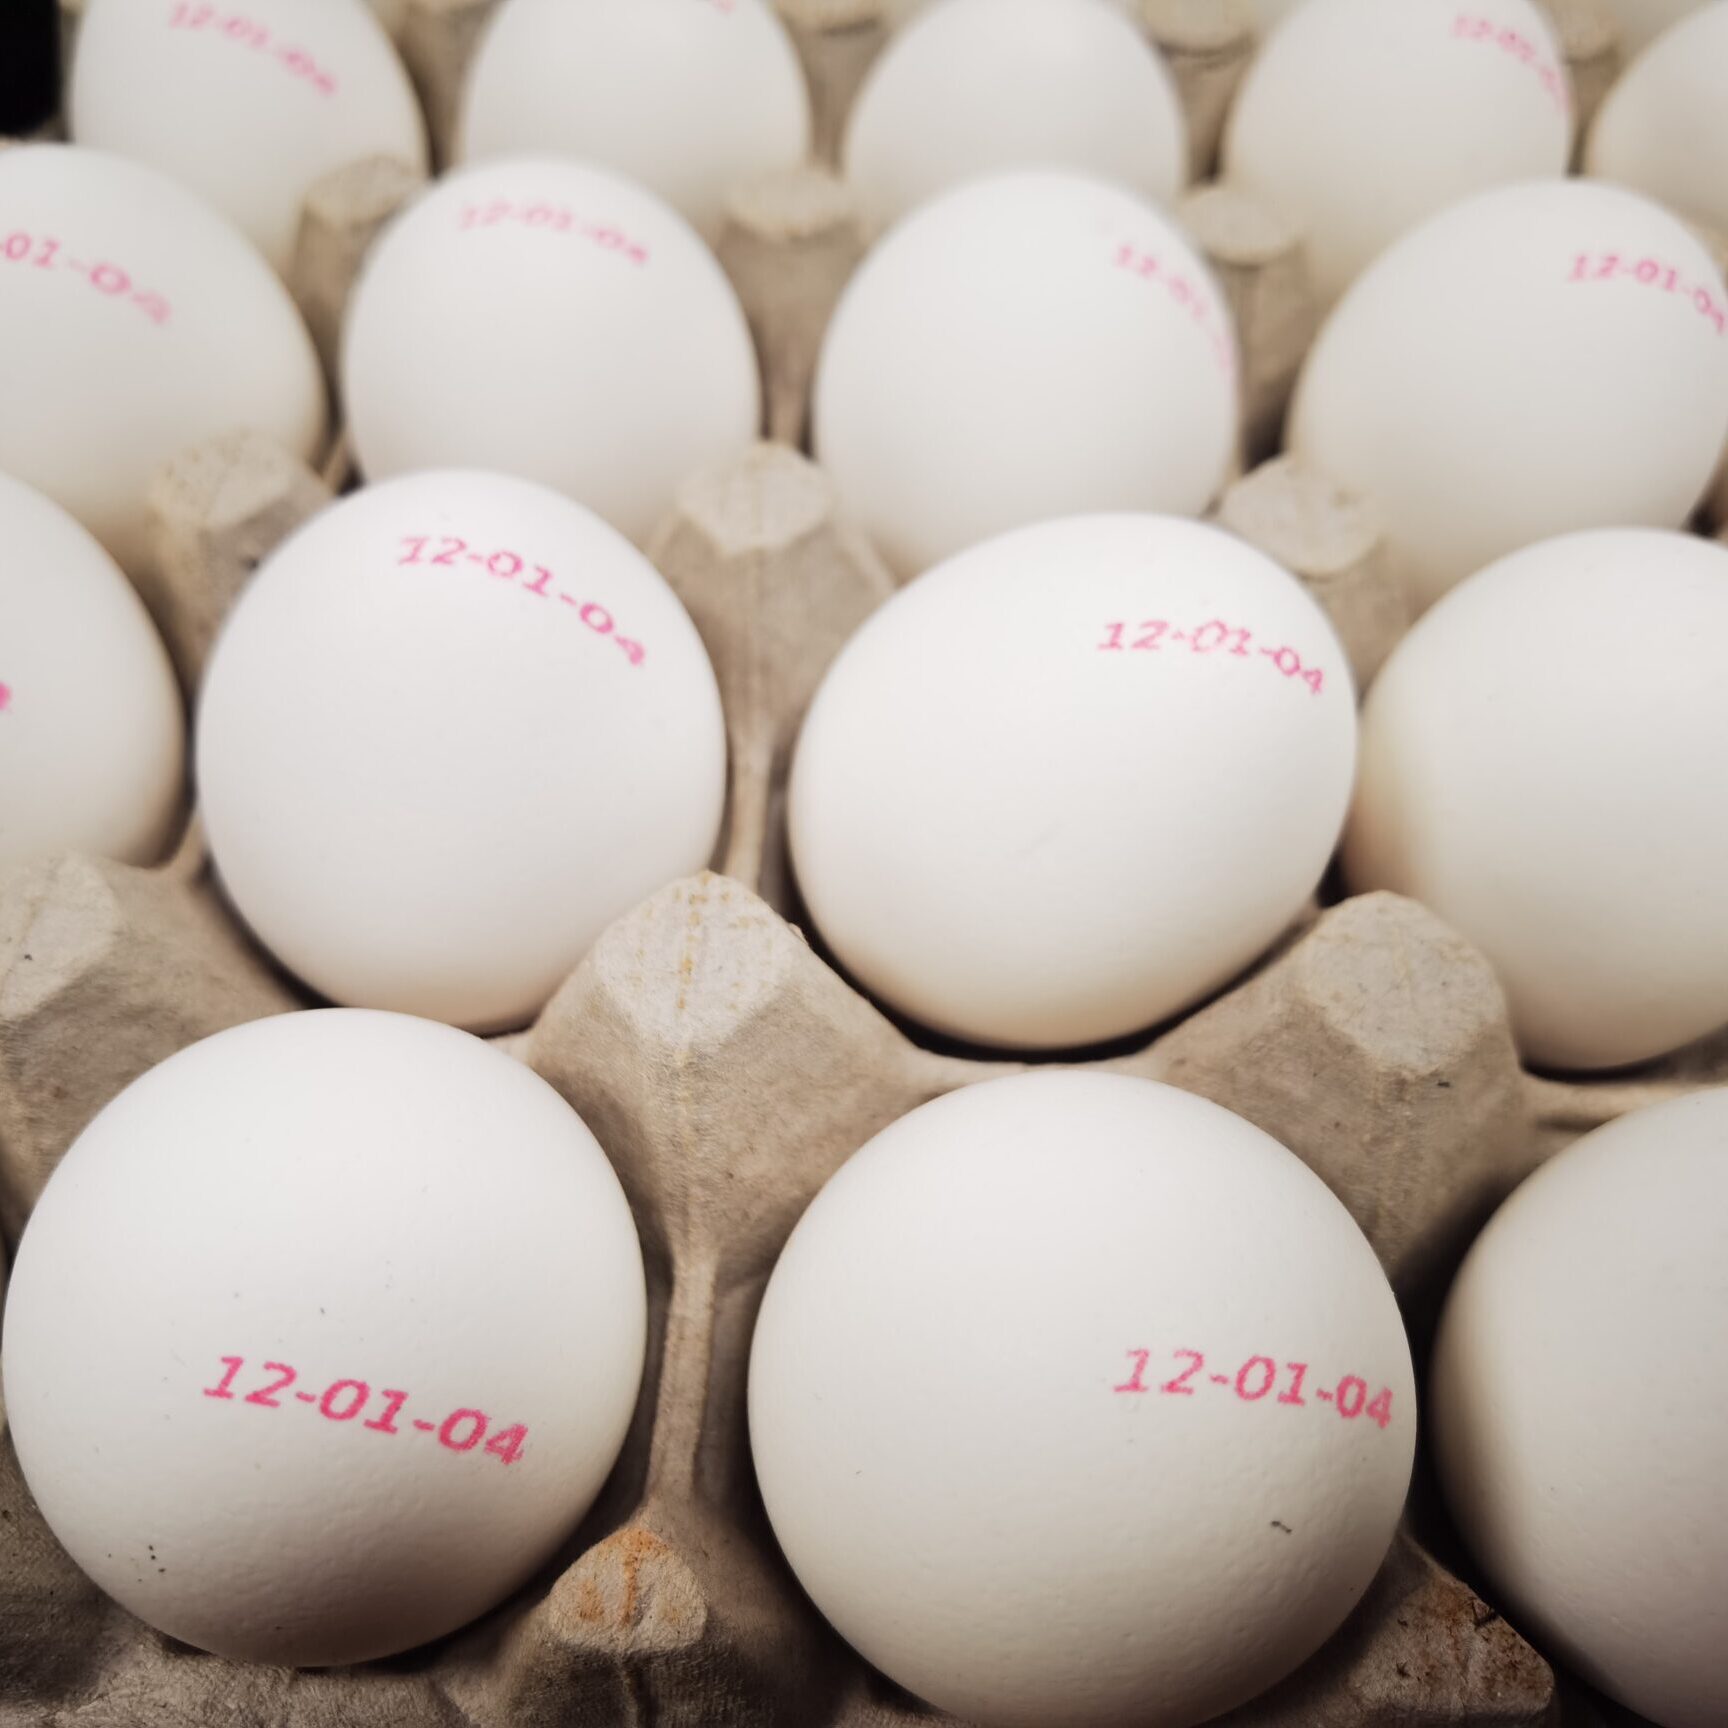 Printing on egg shells with USDA Approved FDG ink